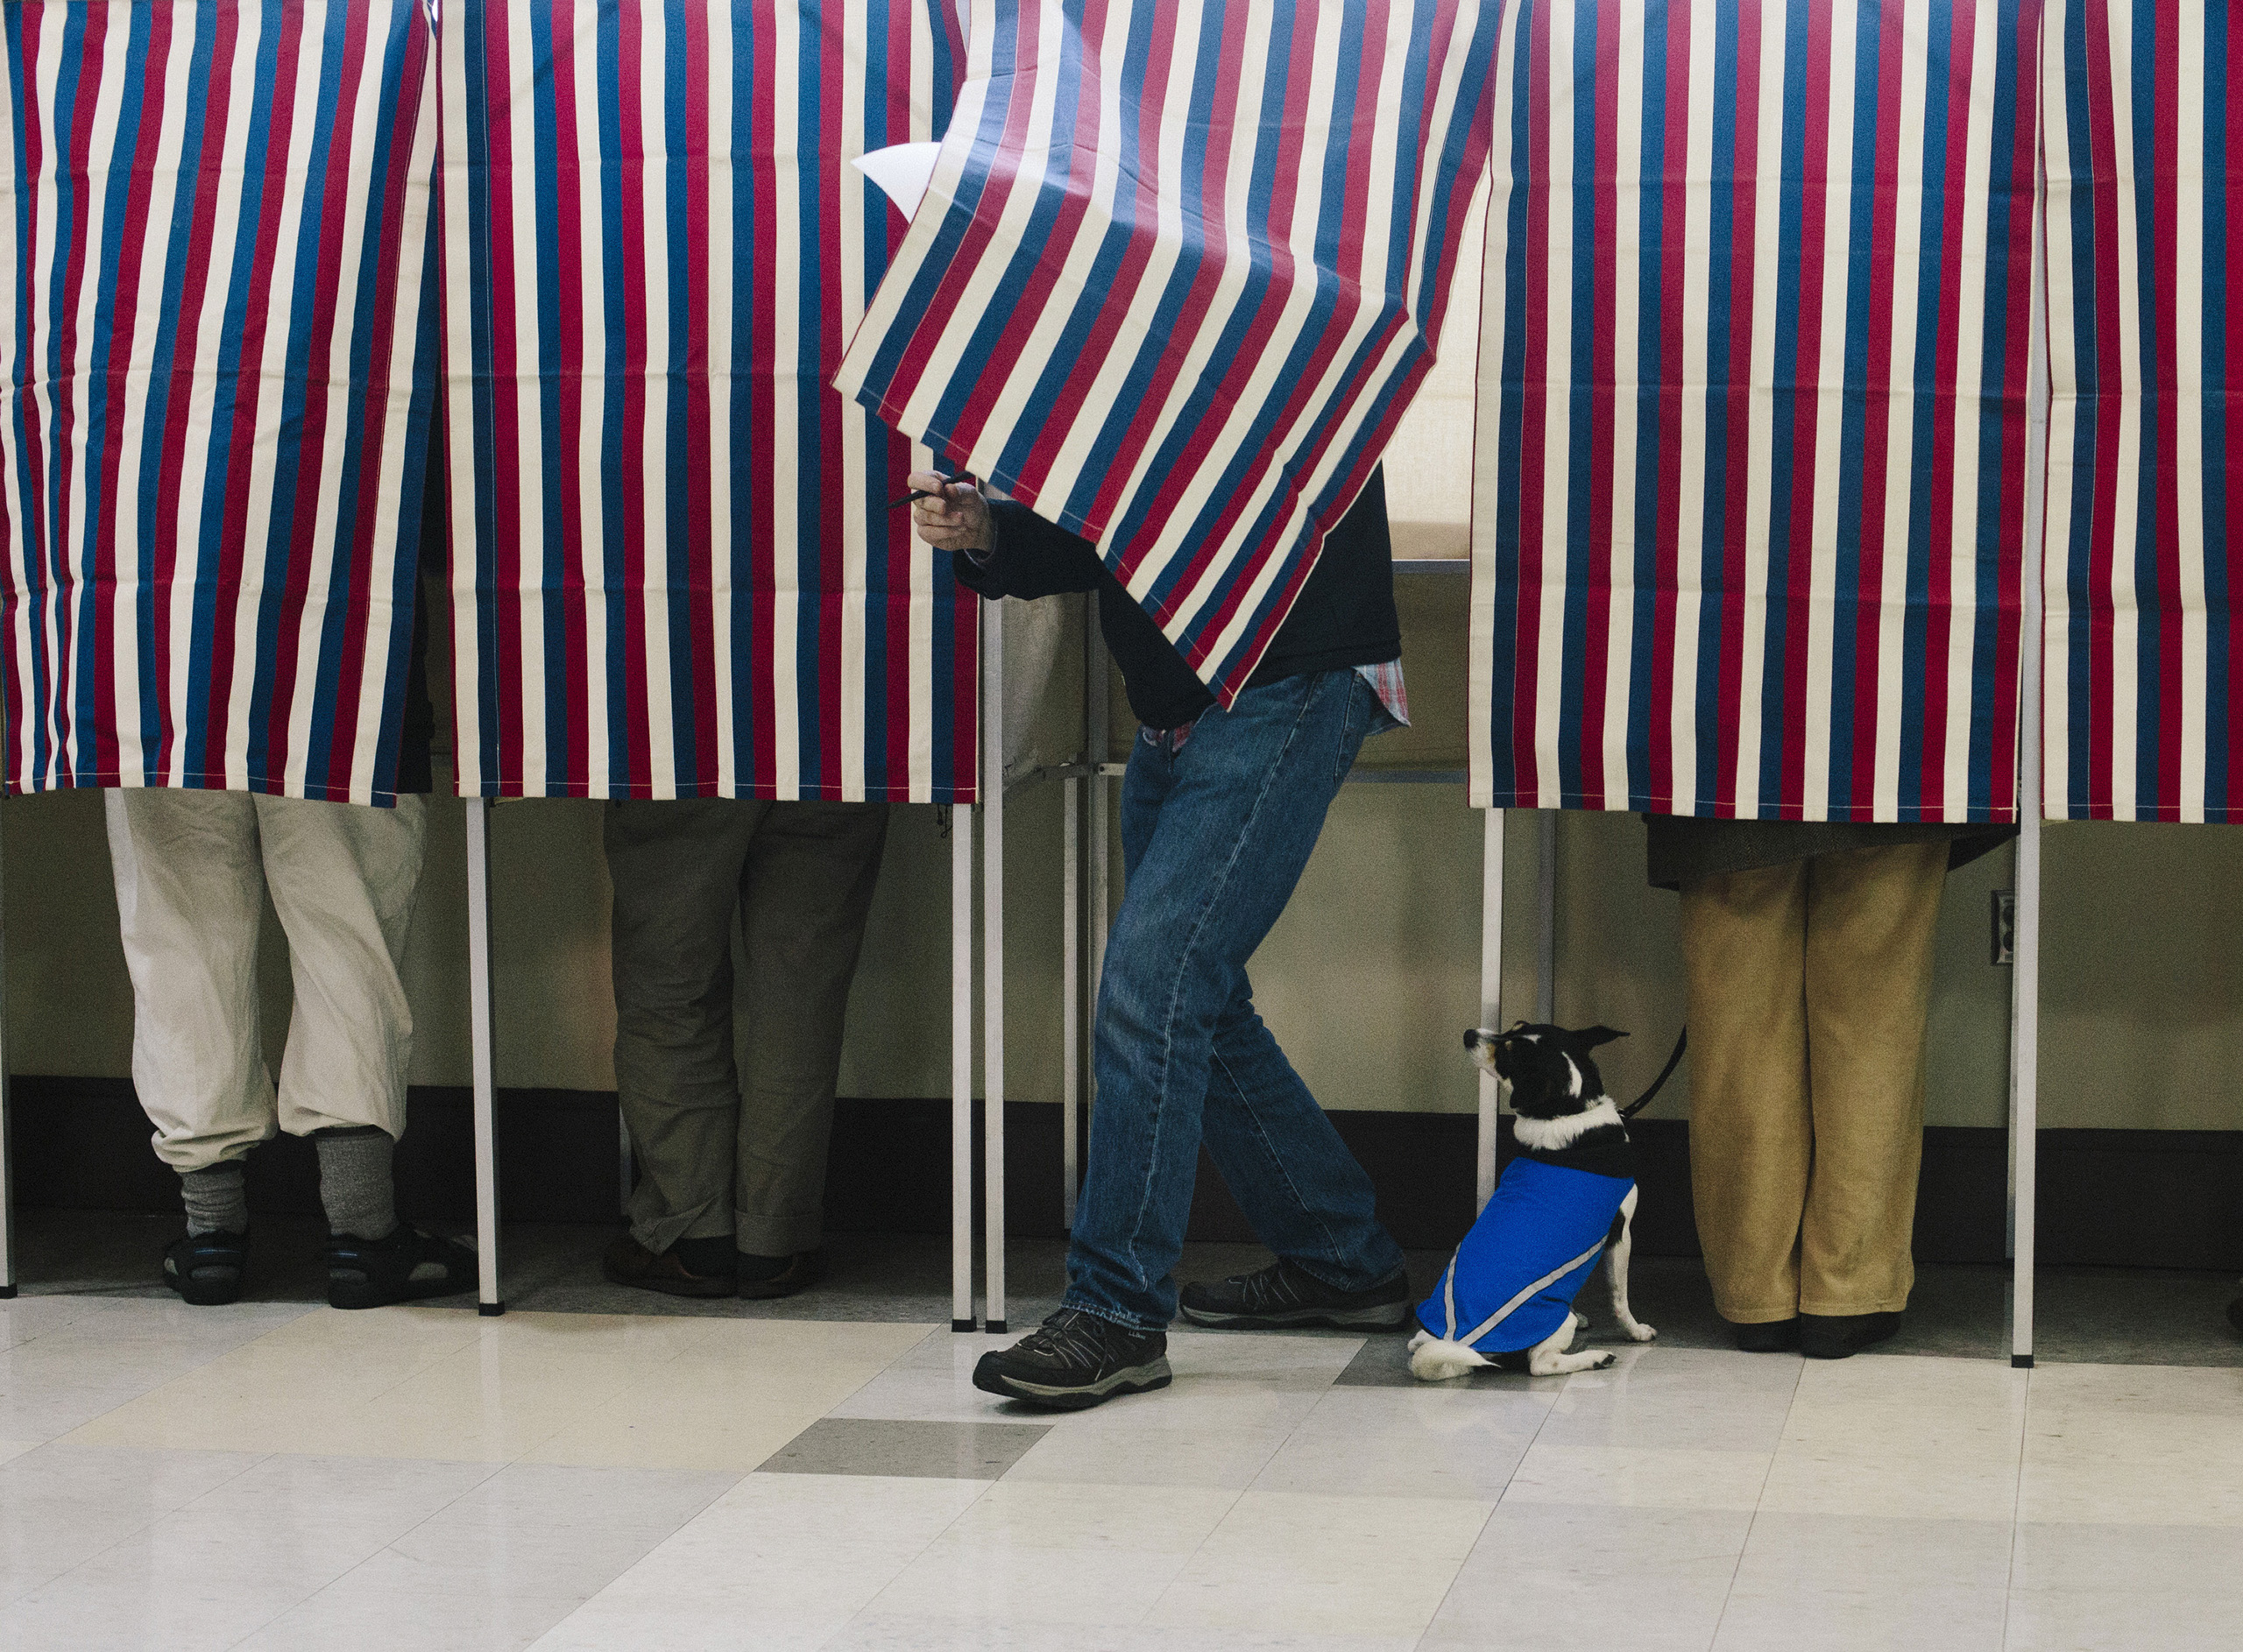 Voters at the Merrill Auditorium Rehearsal Hall in Portland, Maine, on Nov. 4, 2014. (Whitney Hayward—Portland Press Herald/Getty Images)